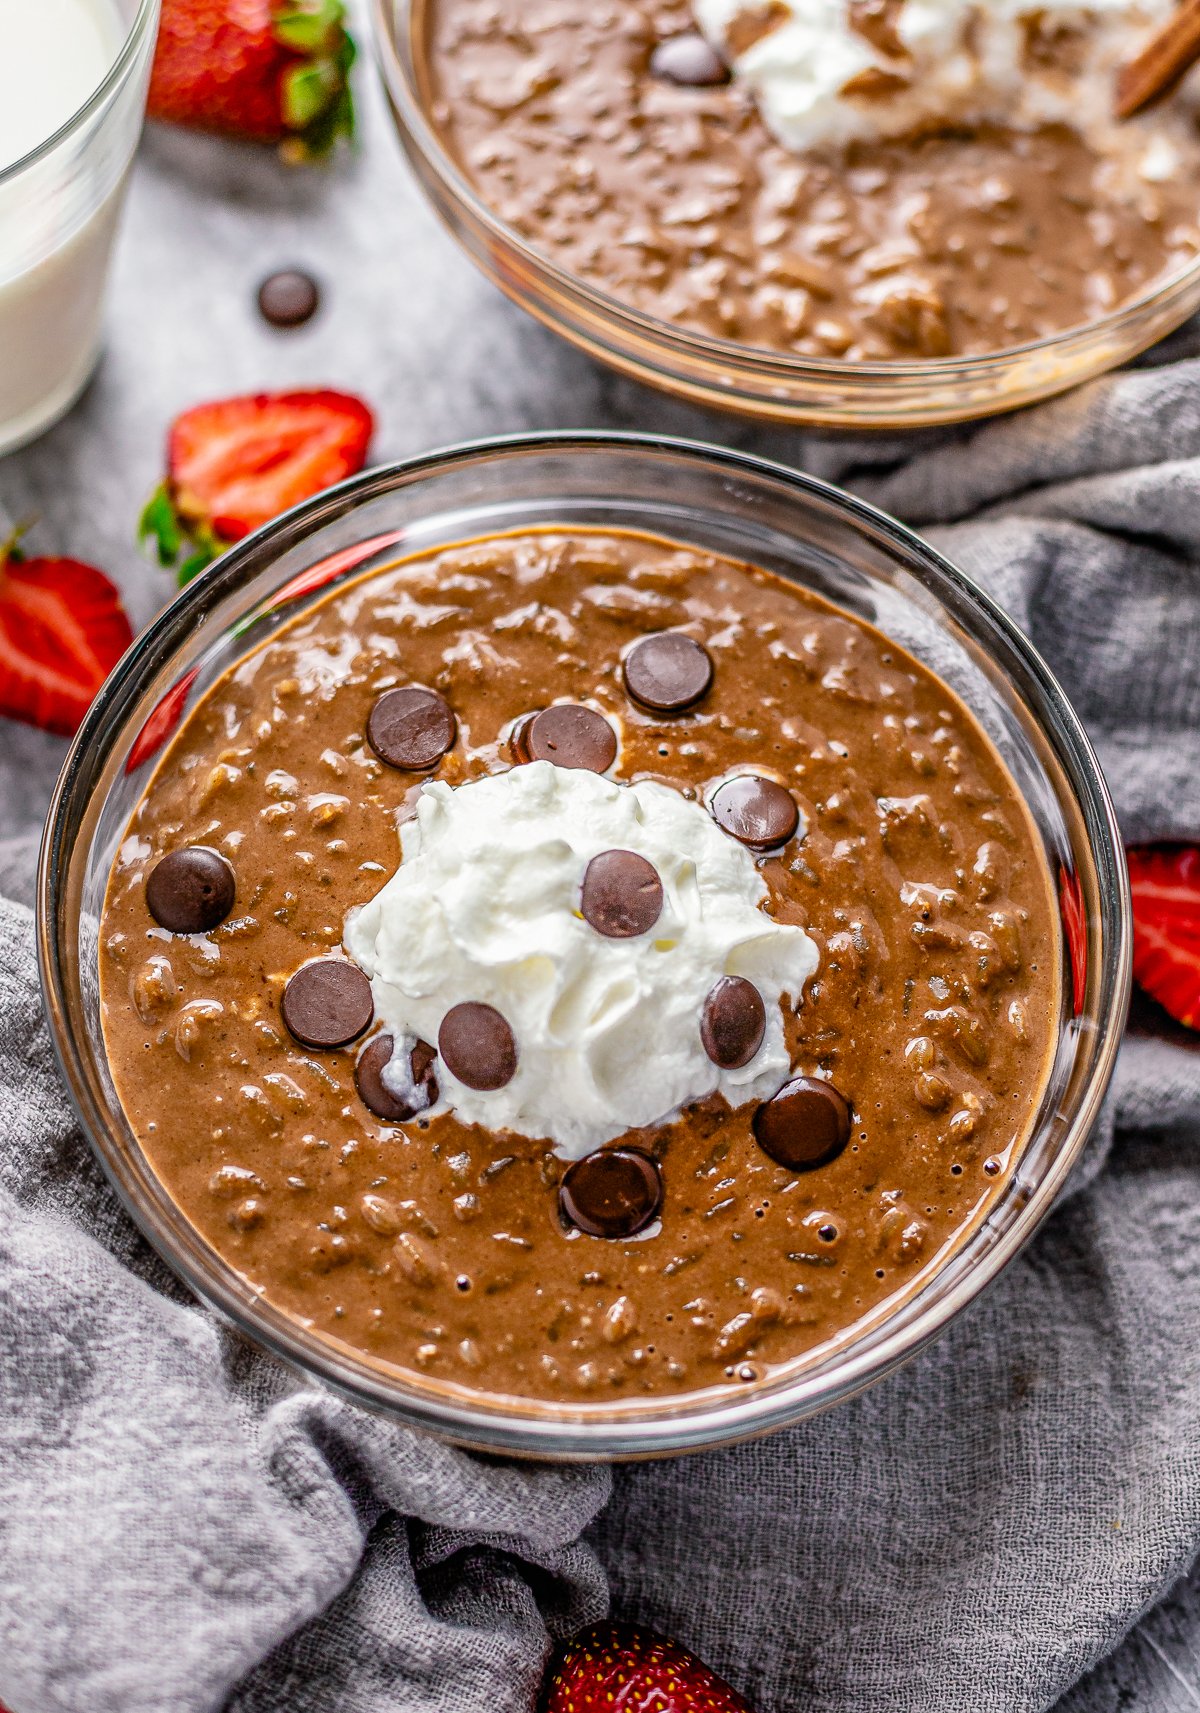 Two bowls of Chocolate Rice Pudding garnished with whipped cream and chocolate chips.